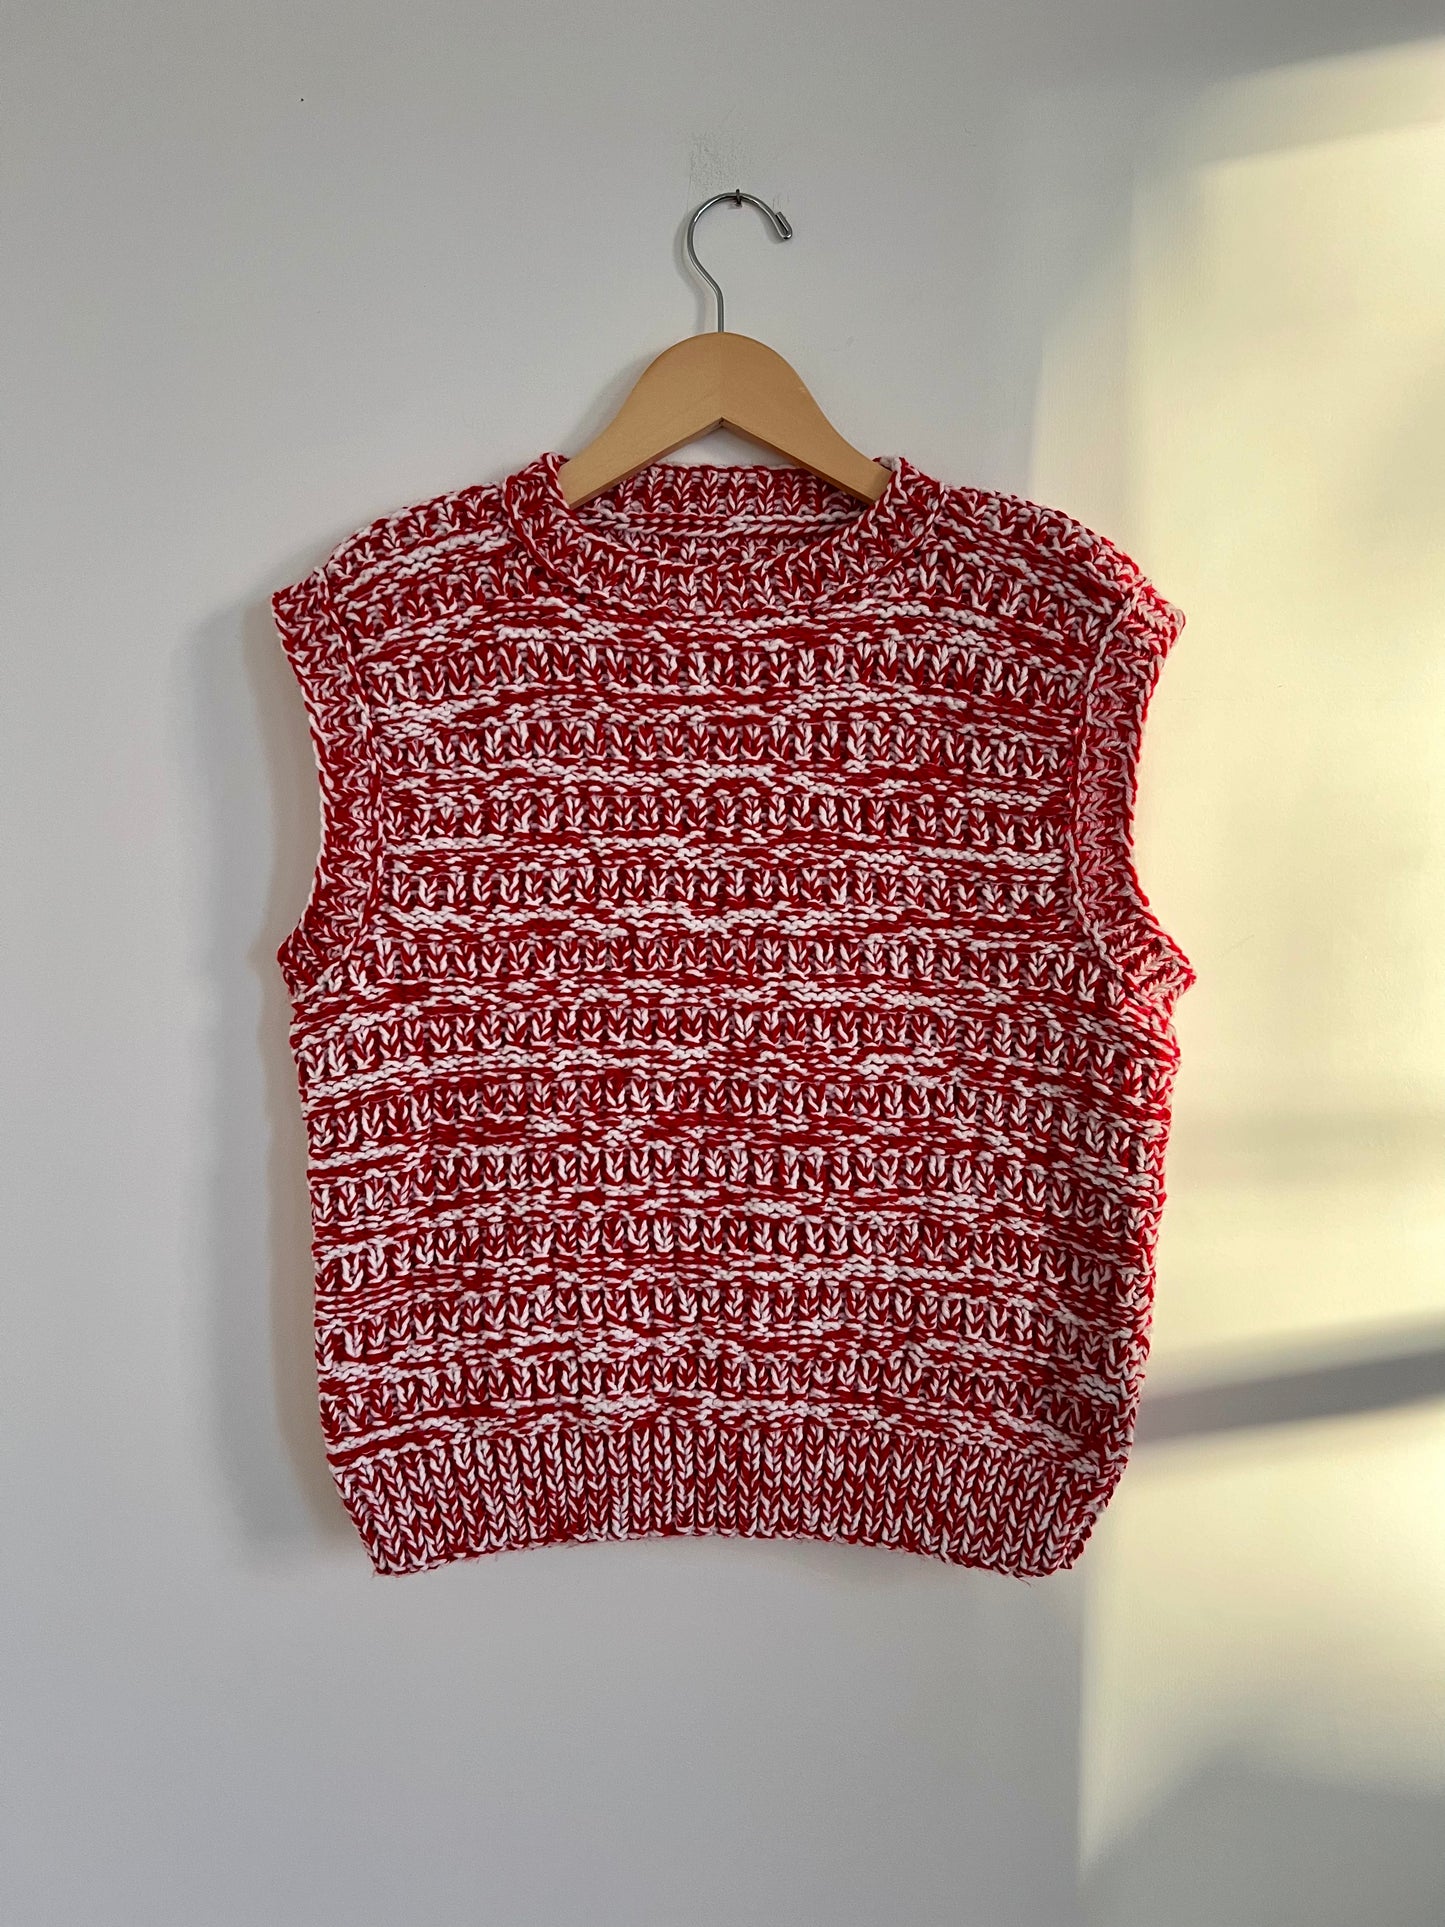 Hand knit vests by Upcycle